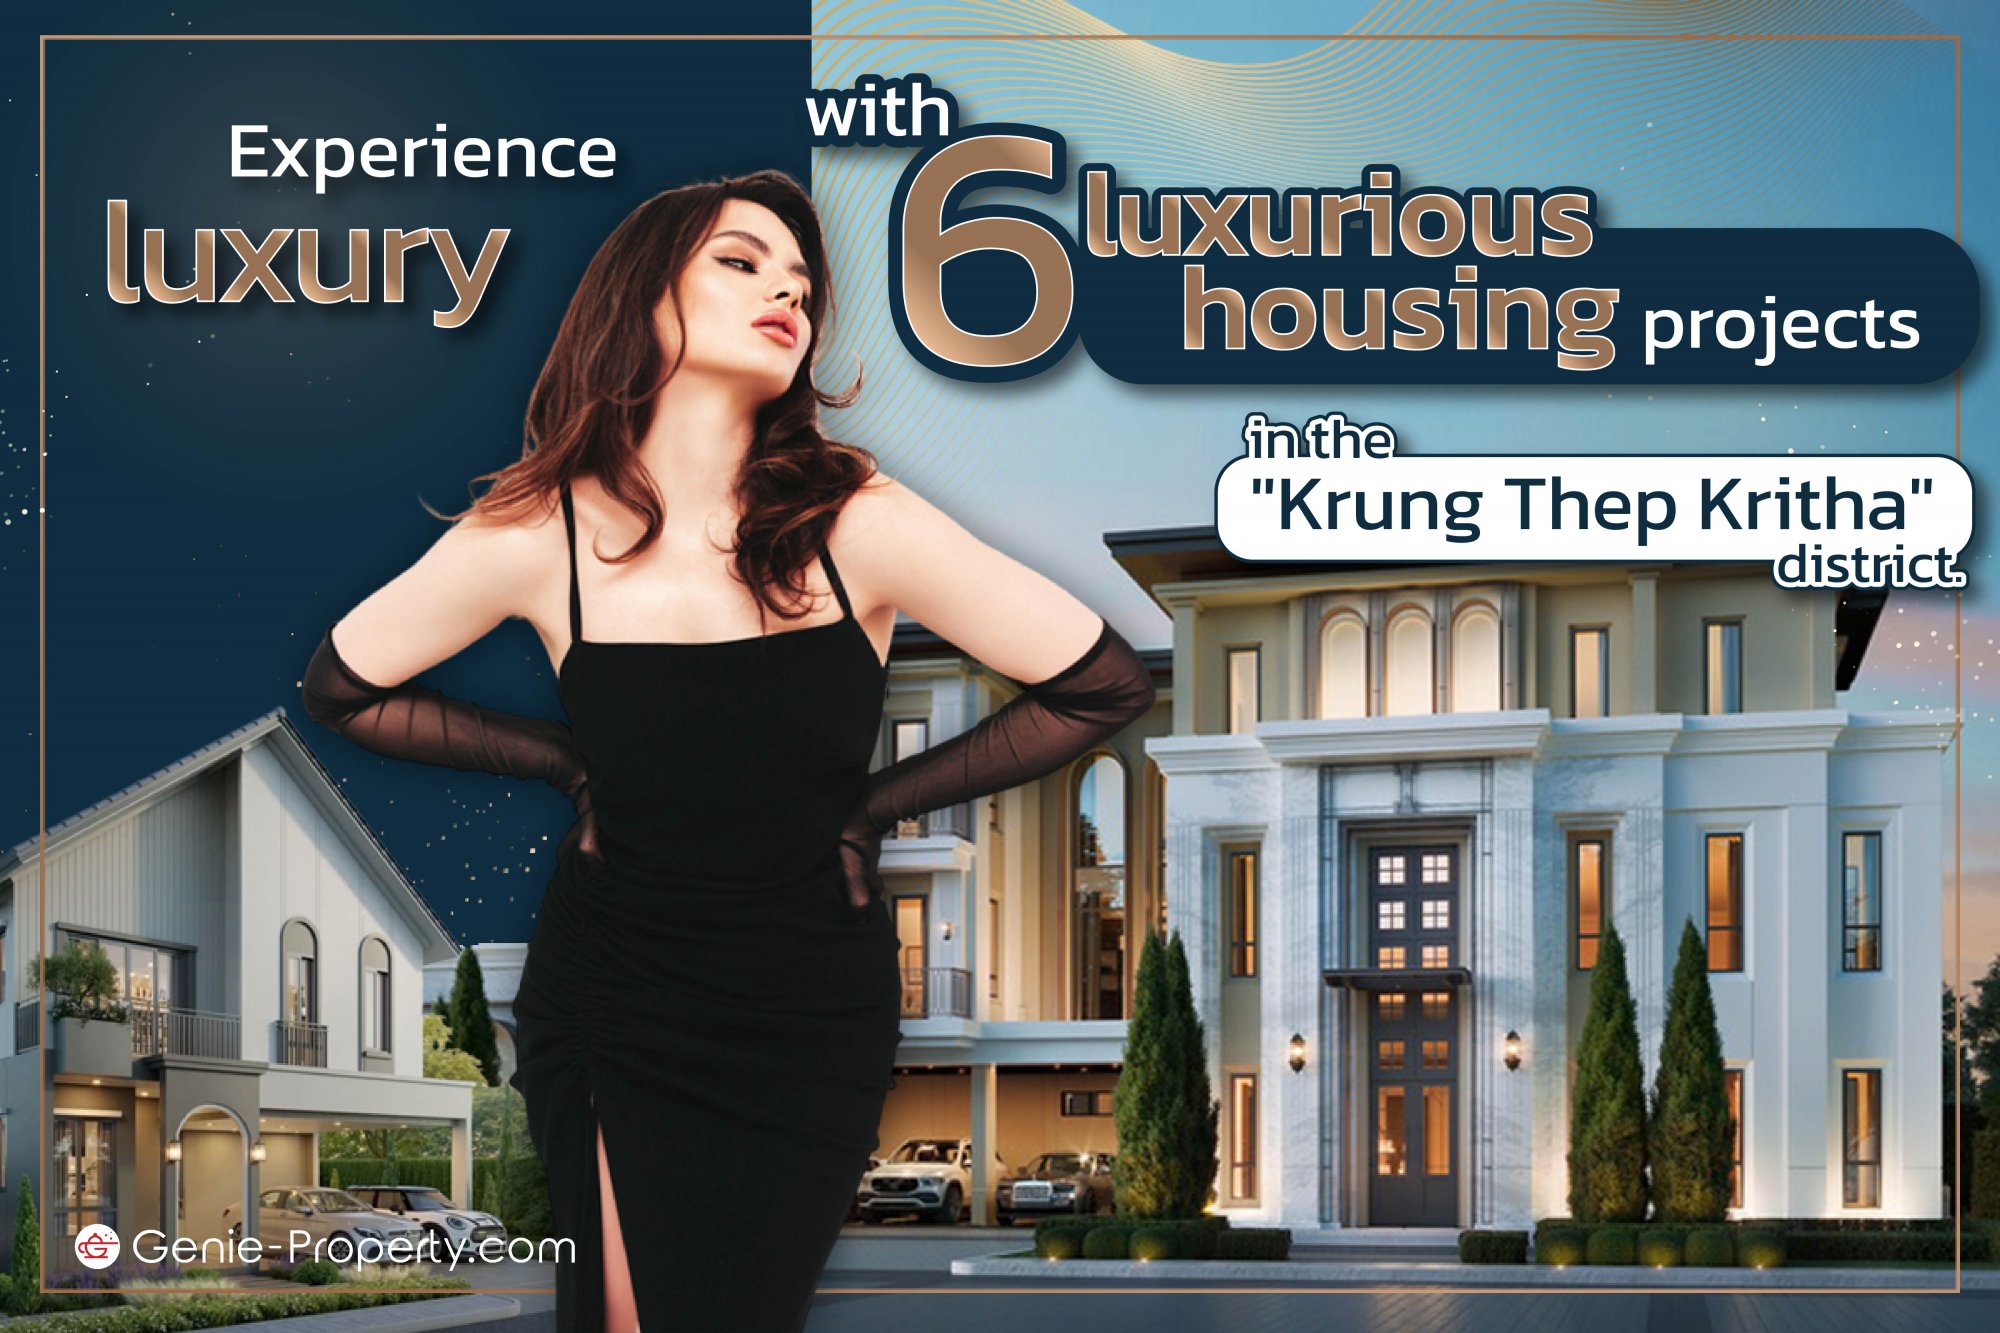 image for Experience luxury with 6 luxurious housing projects in the "Krung Thep Kritha" district.